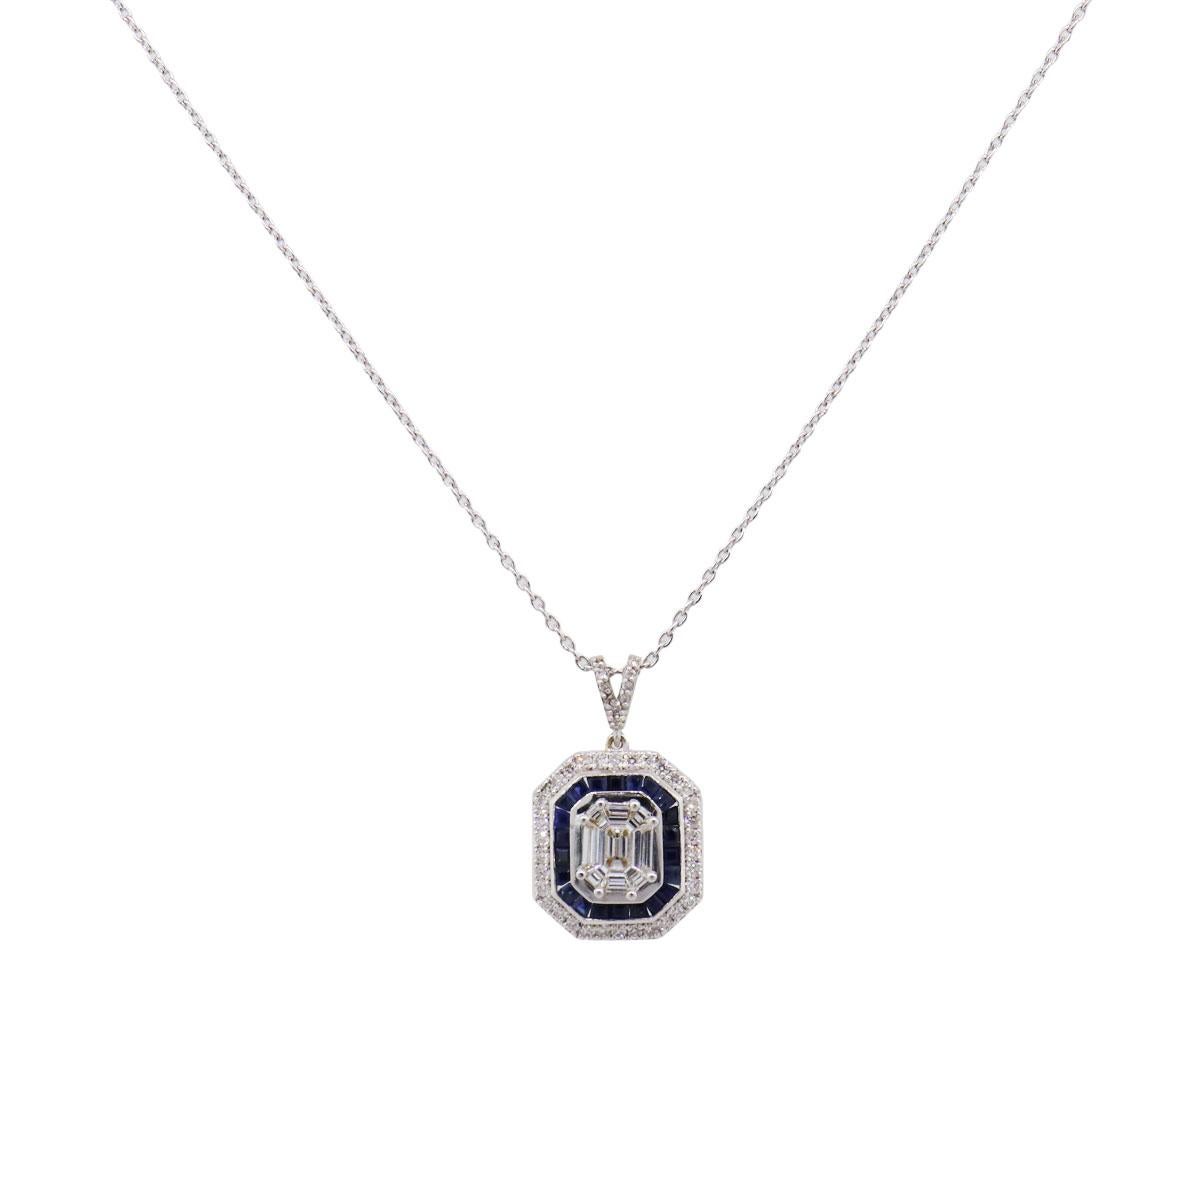 Material: 18k white gold
Diamond Details: Approximately 0.71ctw of round brilliant diamonds. Diamonds are G/H in color and VS in clarity
Gemstone Details: Approximately 0.70ctw of blue sapphires
Measurements: Necklace measures 17.75″ in